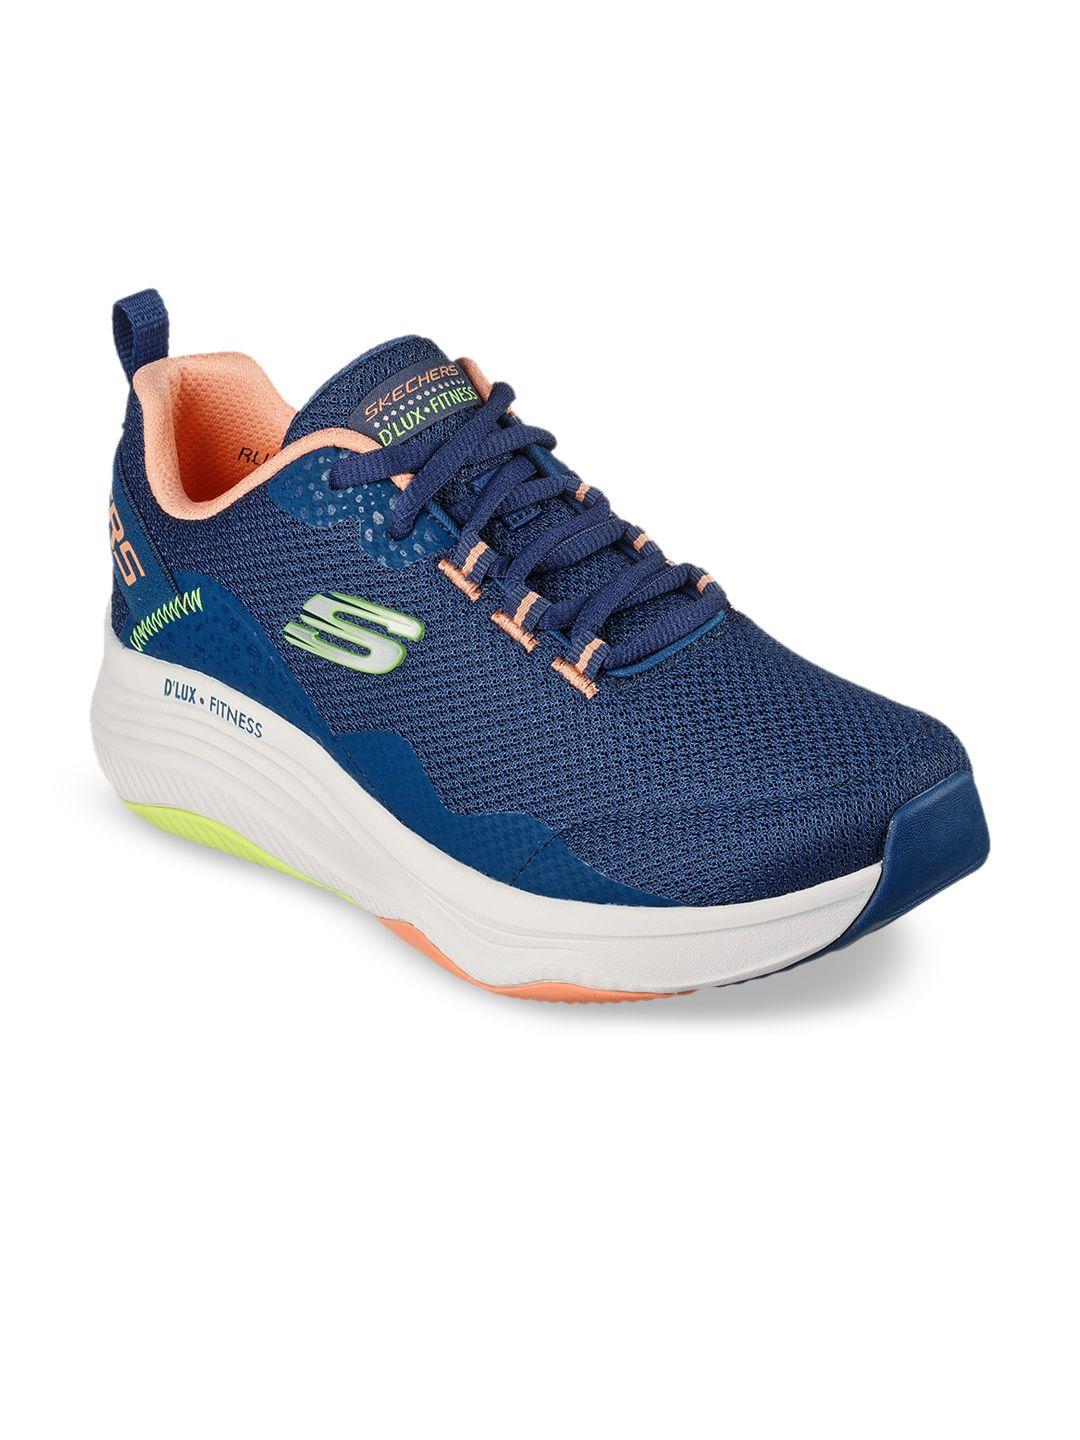 skechers women navy blue lace-up everyday sneakers